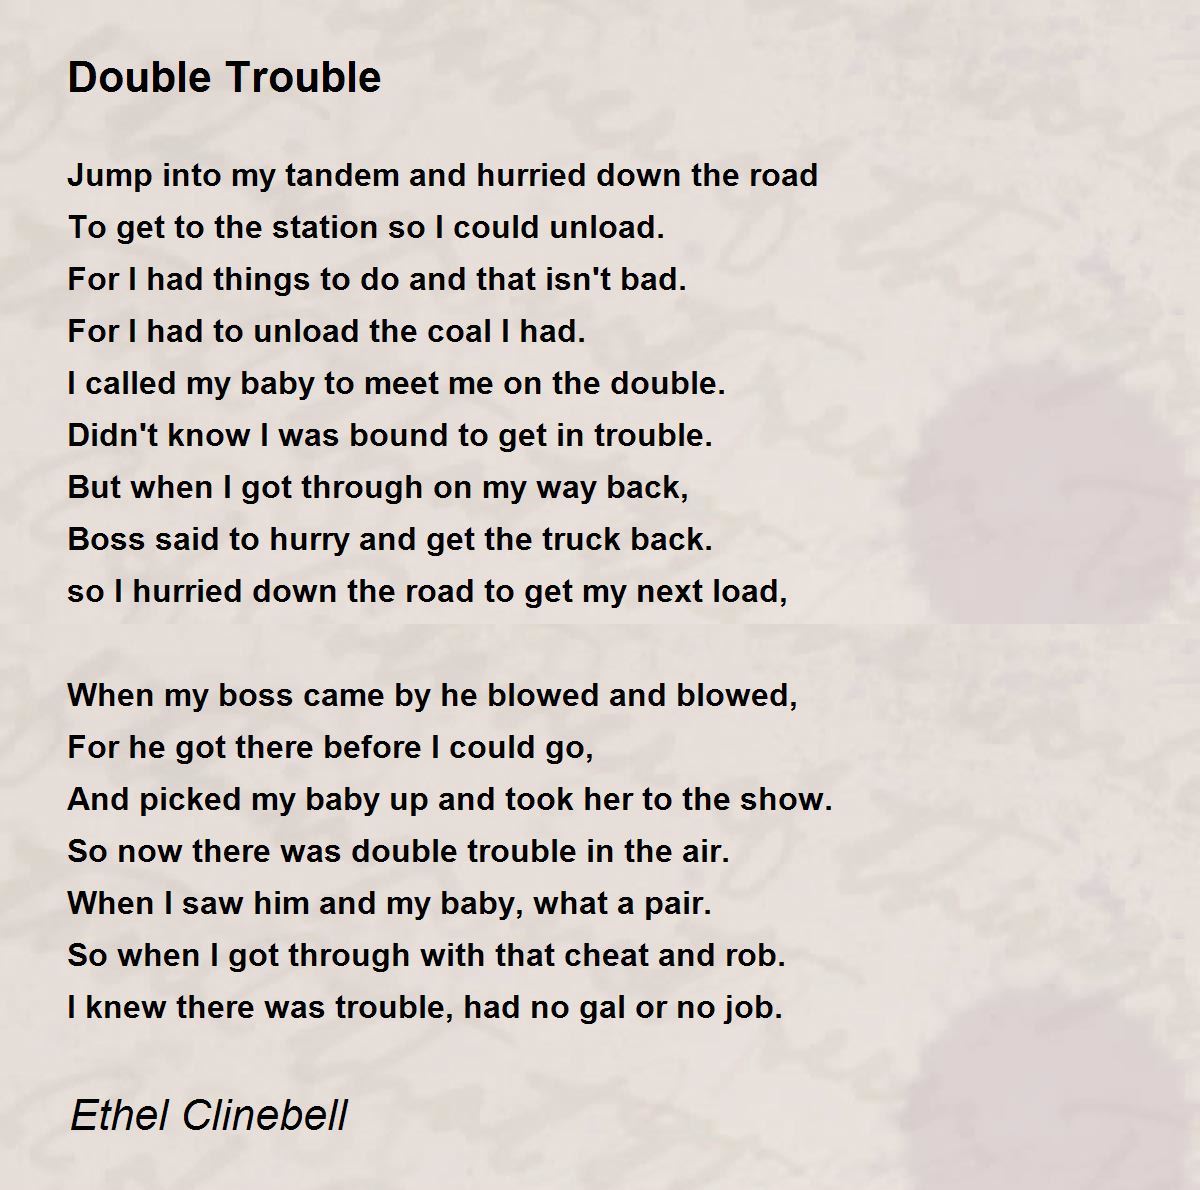 Double Trouble - Double Trouble Poem by Ethel Clinebell